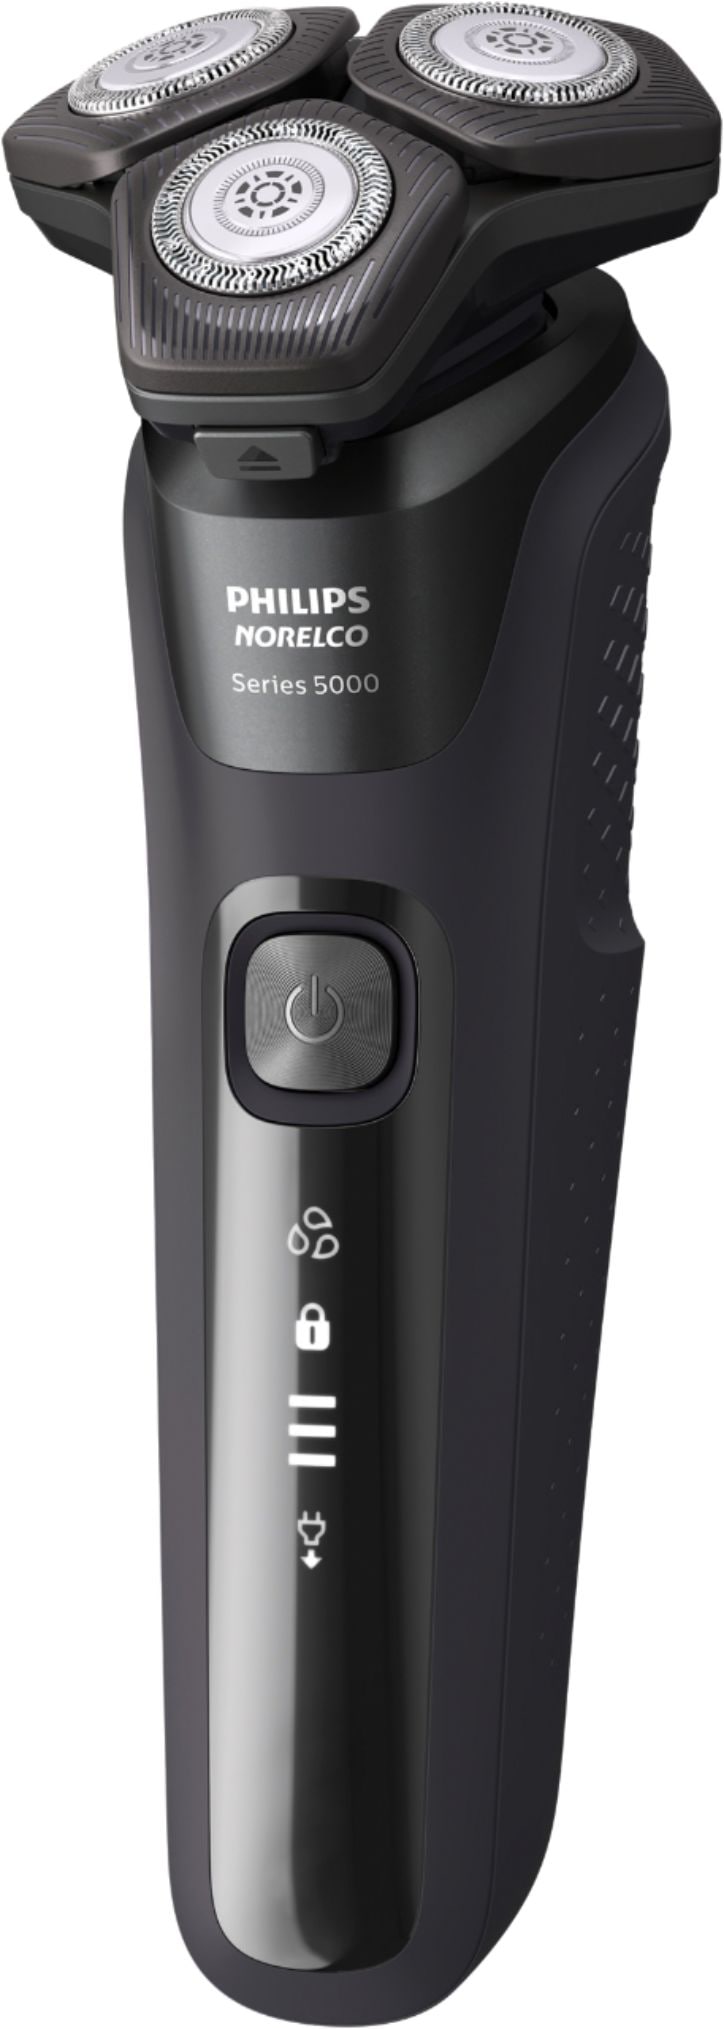 Philips Norelco Shaver 5300, Rechargeable Wet & Dry Shaver with Pop-Up Trimmer, S5588/81 - Deep Black_1